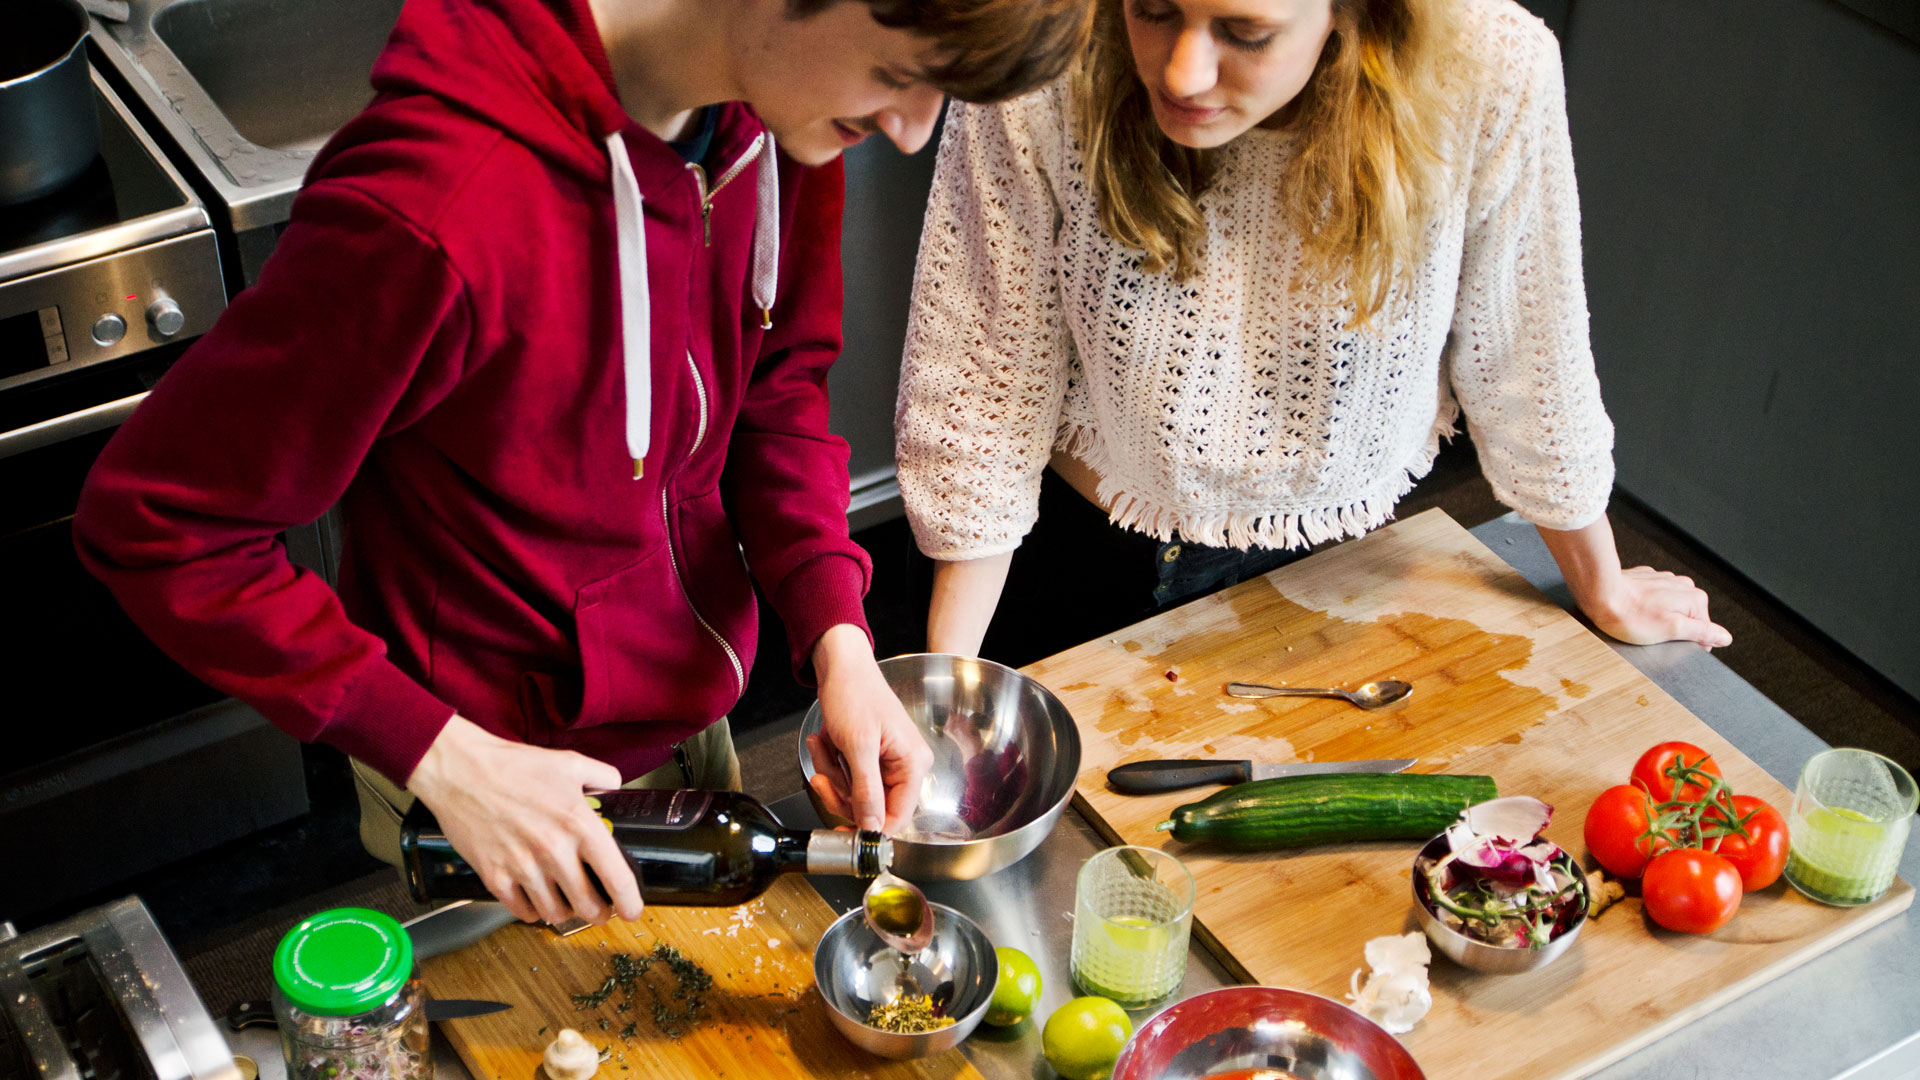 Alastair Coates and Nina Wagner prepare ingredients for their recipes